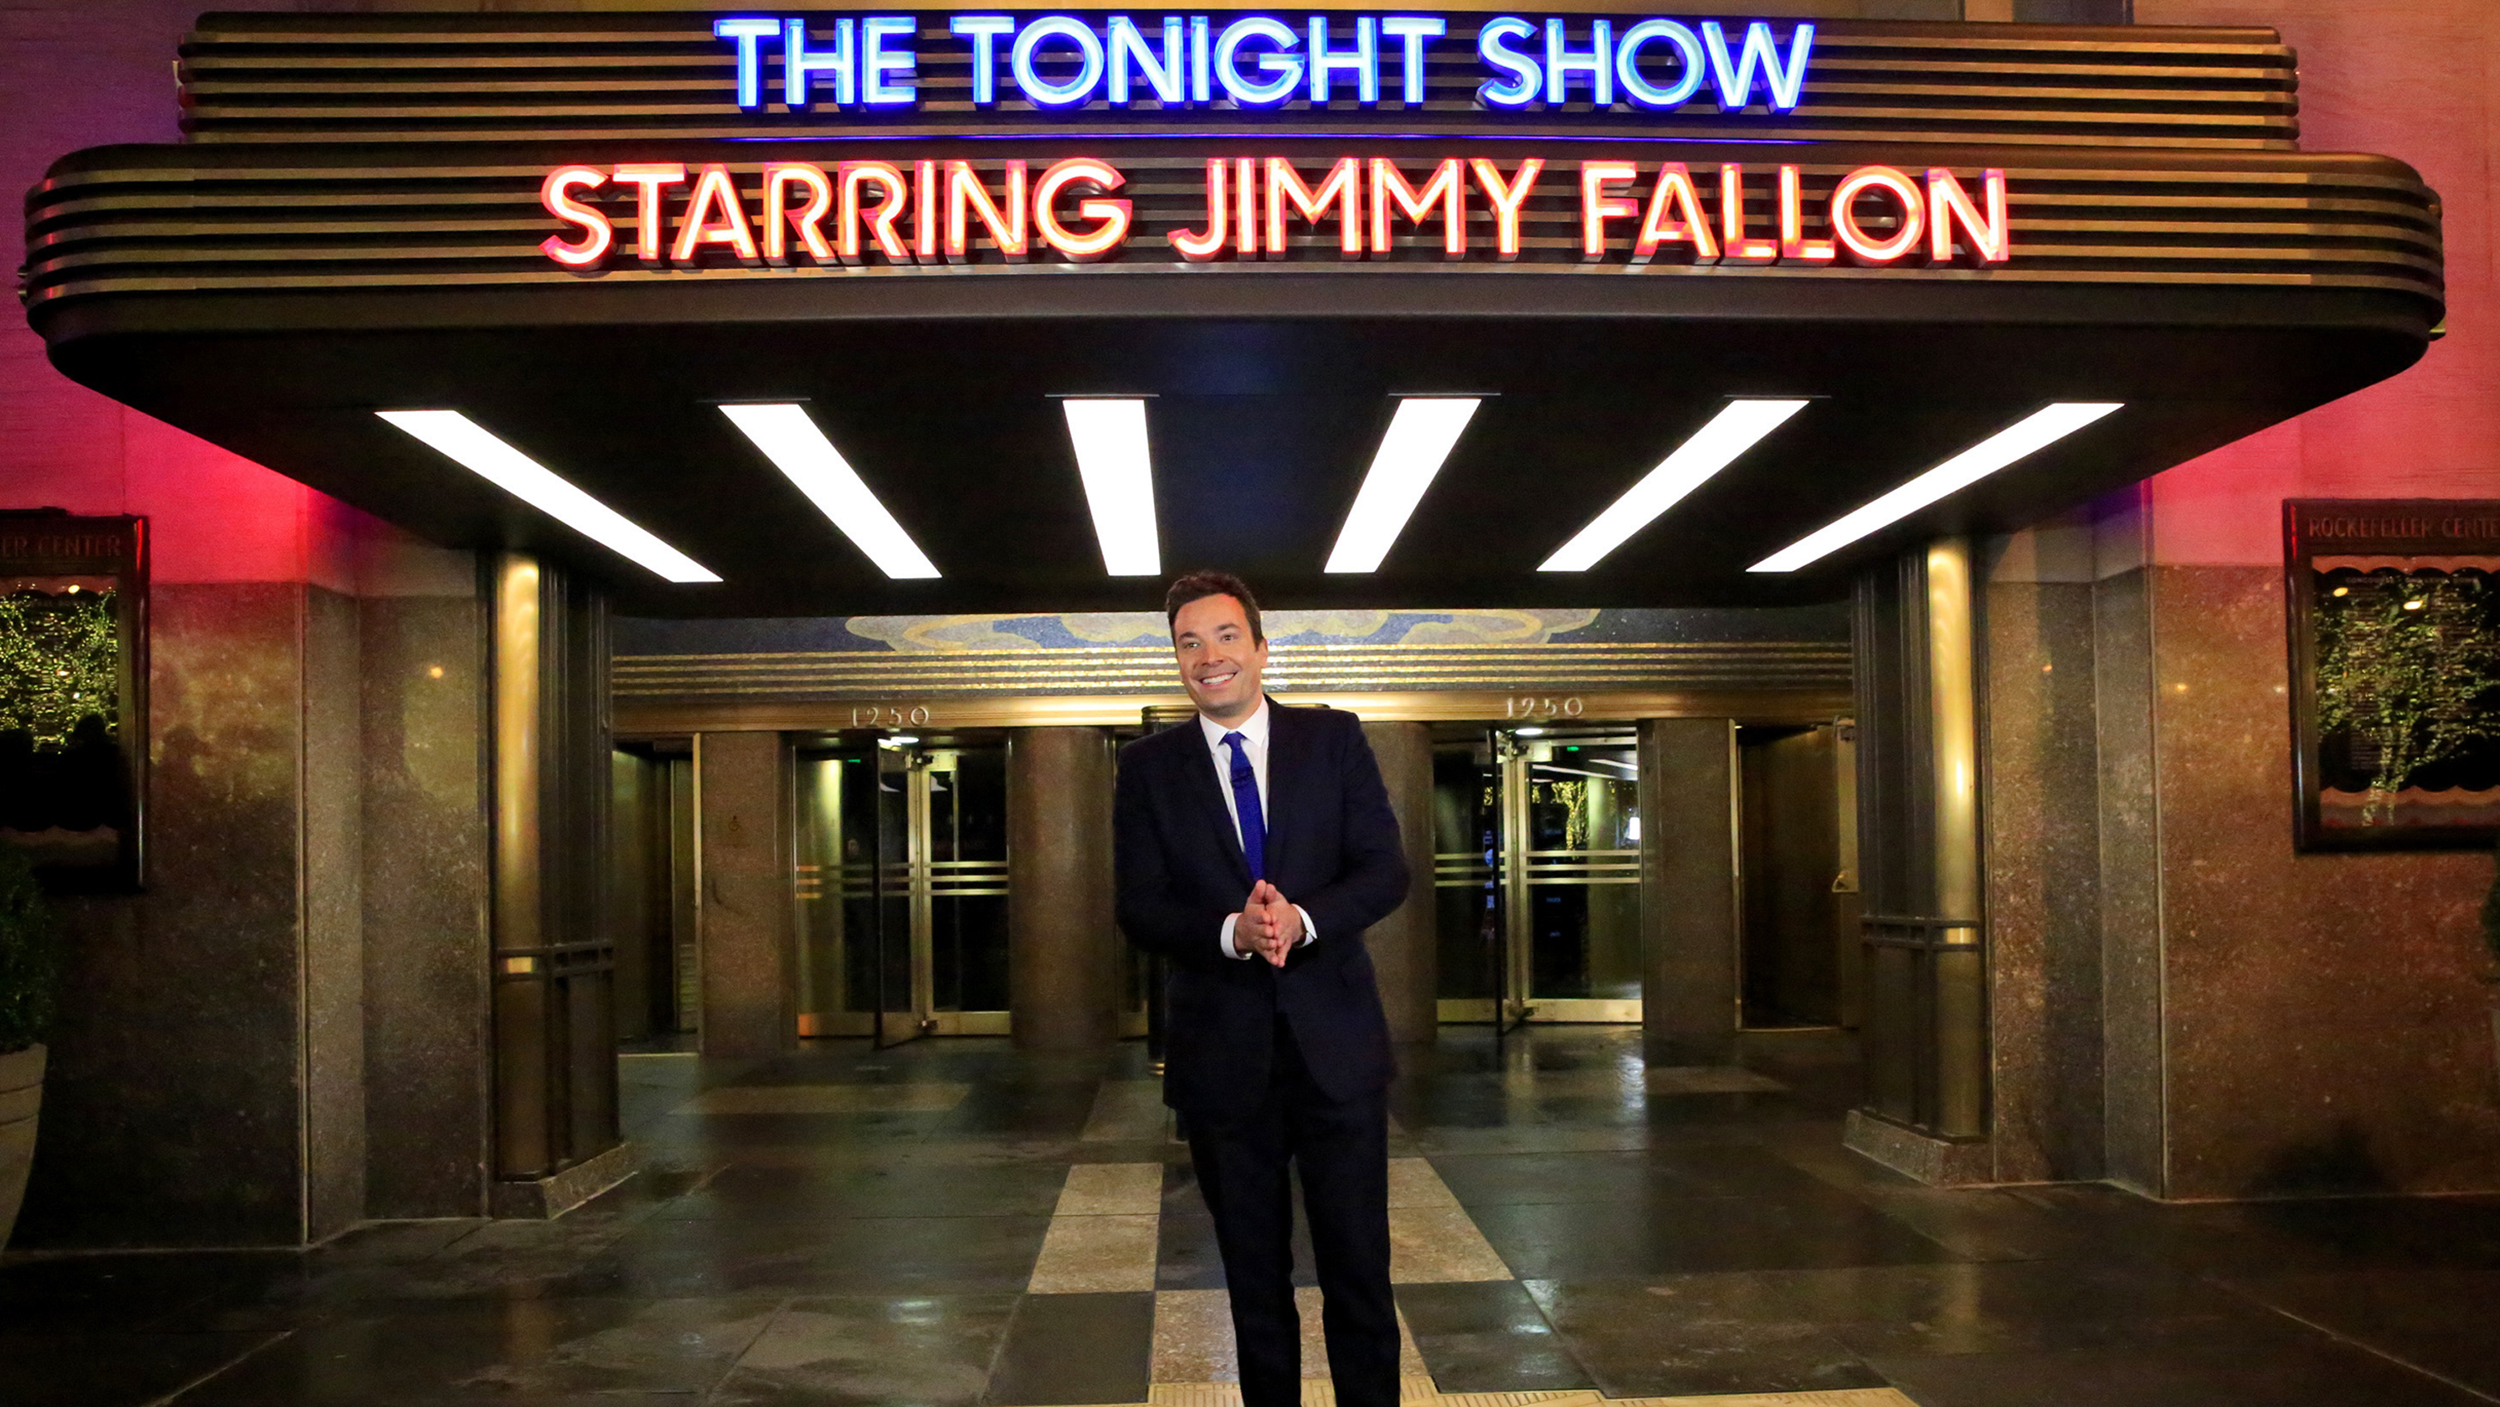 Jimmy Fallon gets name in lights on new 'Tonight Show' 30 Rock marquee